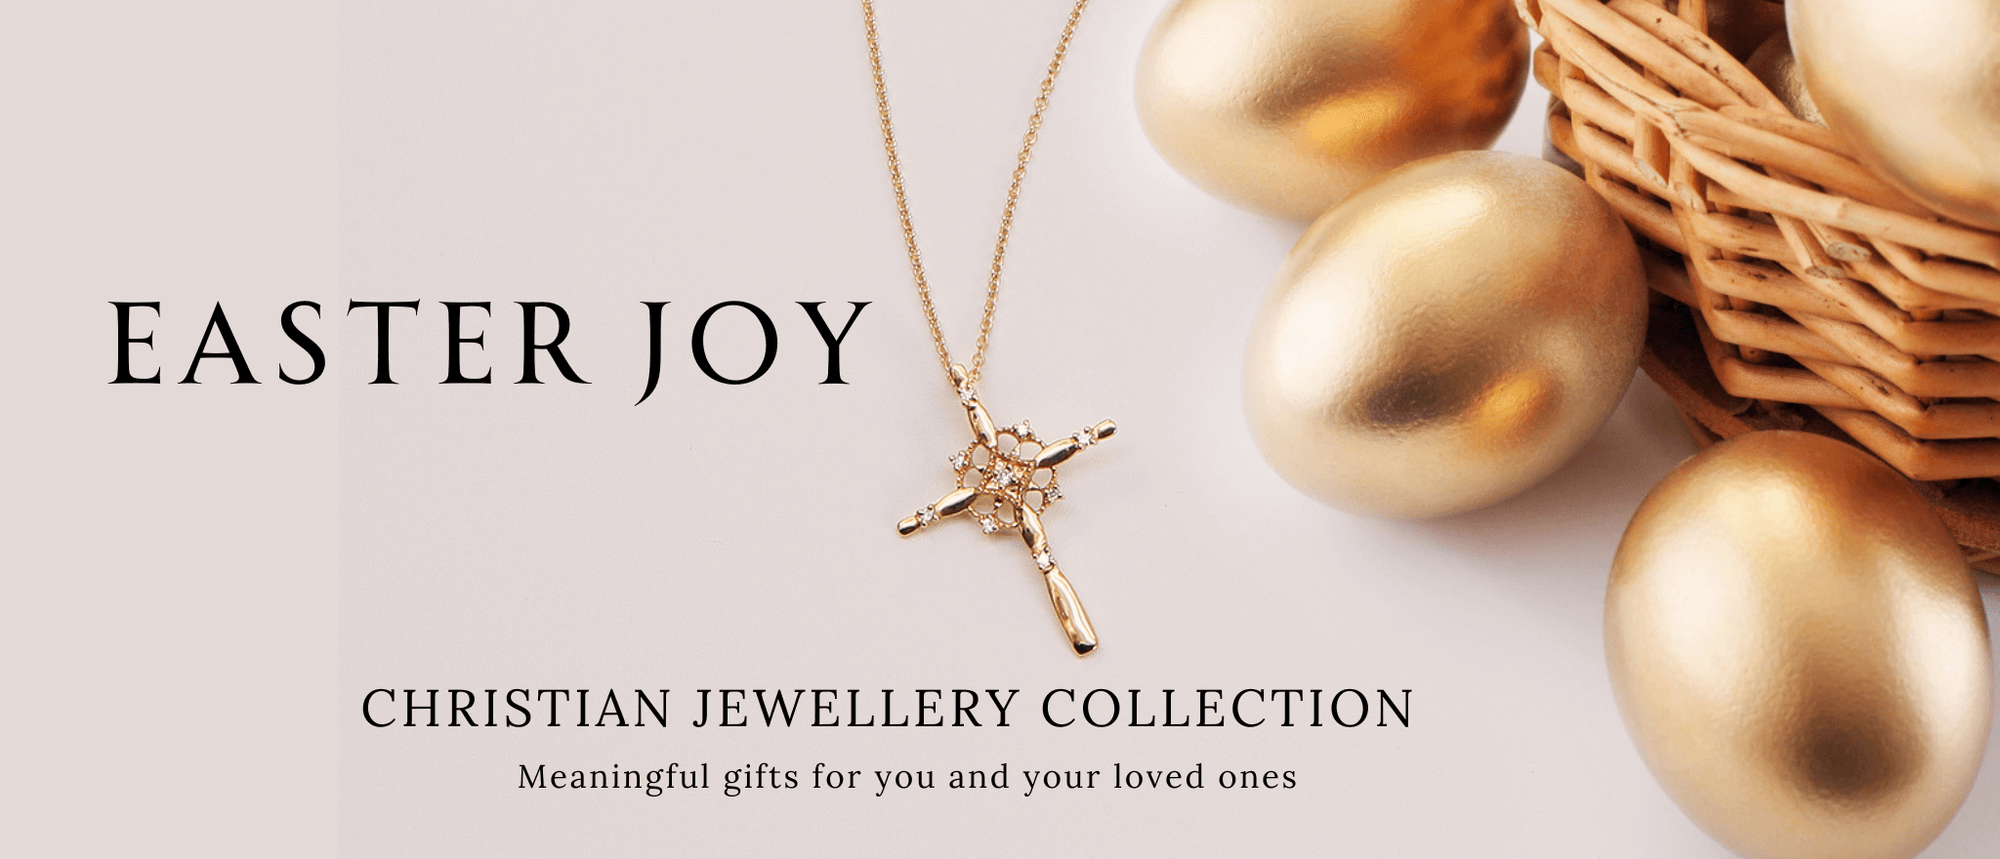 Easter Joy Christian Jewellery Collection